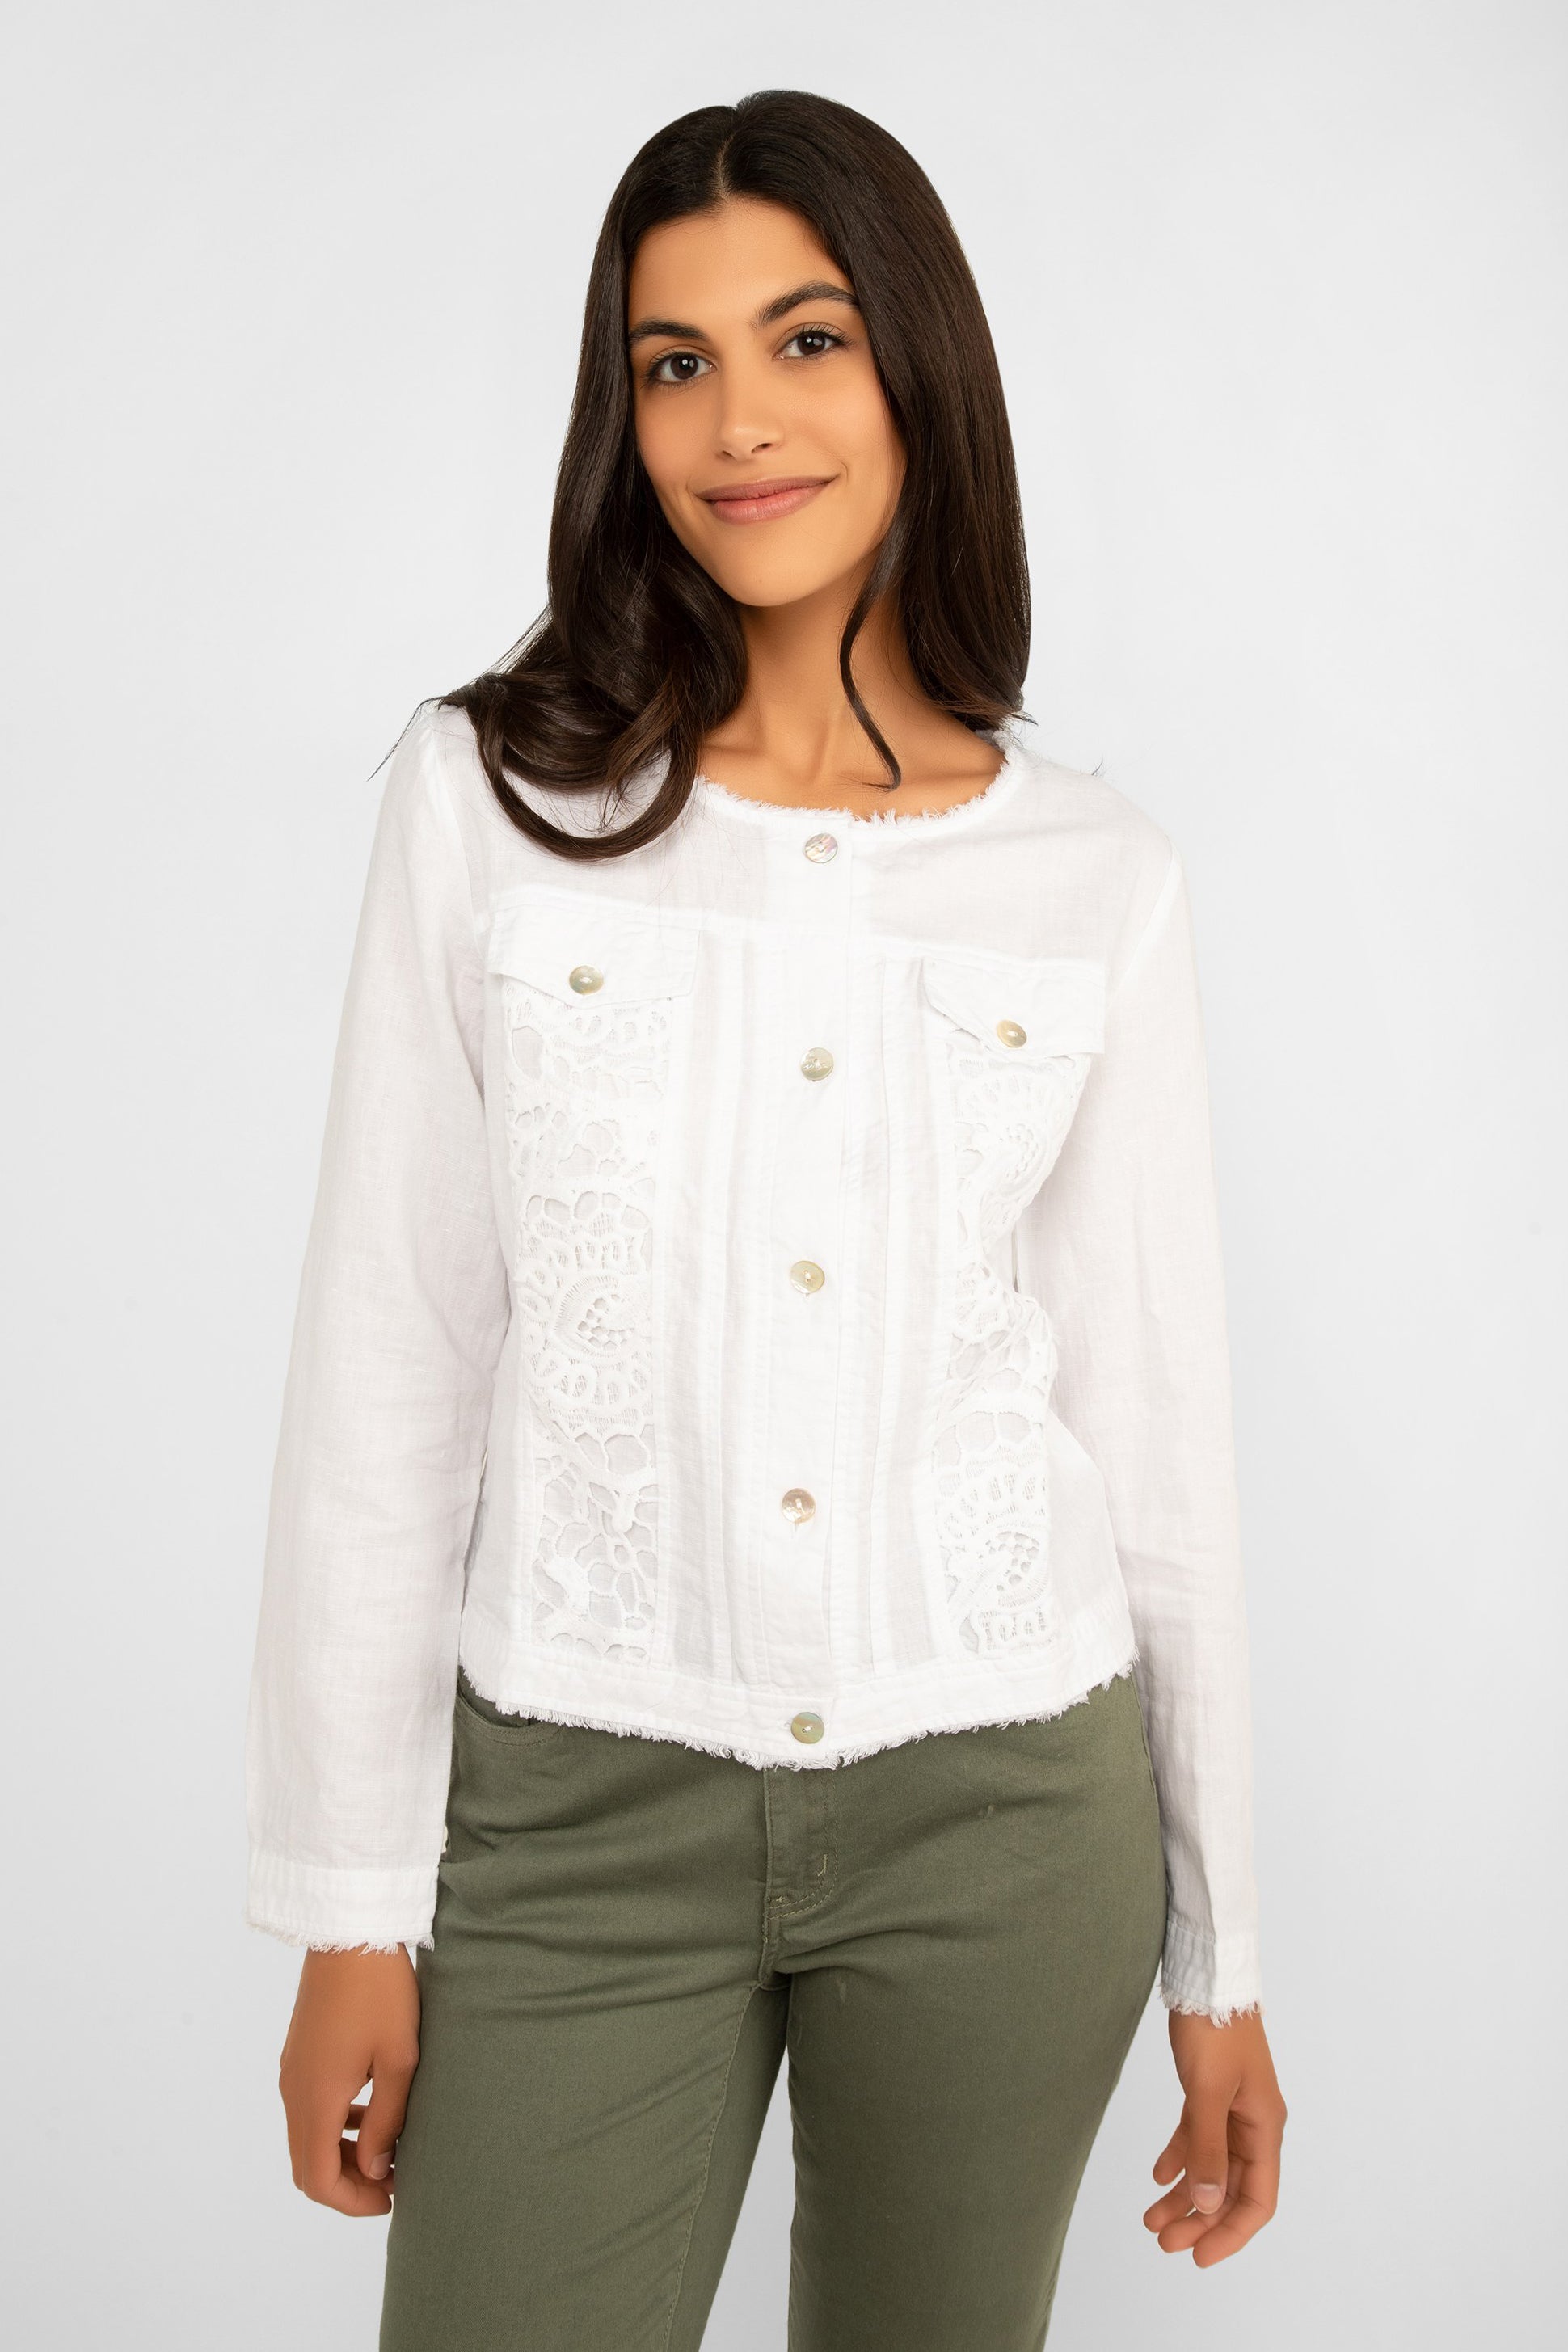 Picadilly (JM535) Women's Long Sleeve Lace Trim Button-Front Jacket with Frayed Hems in White Linen/Cotton blend